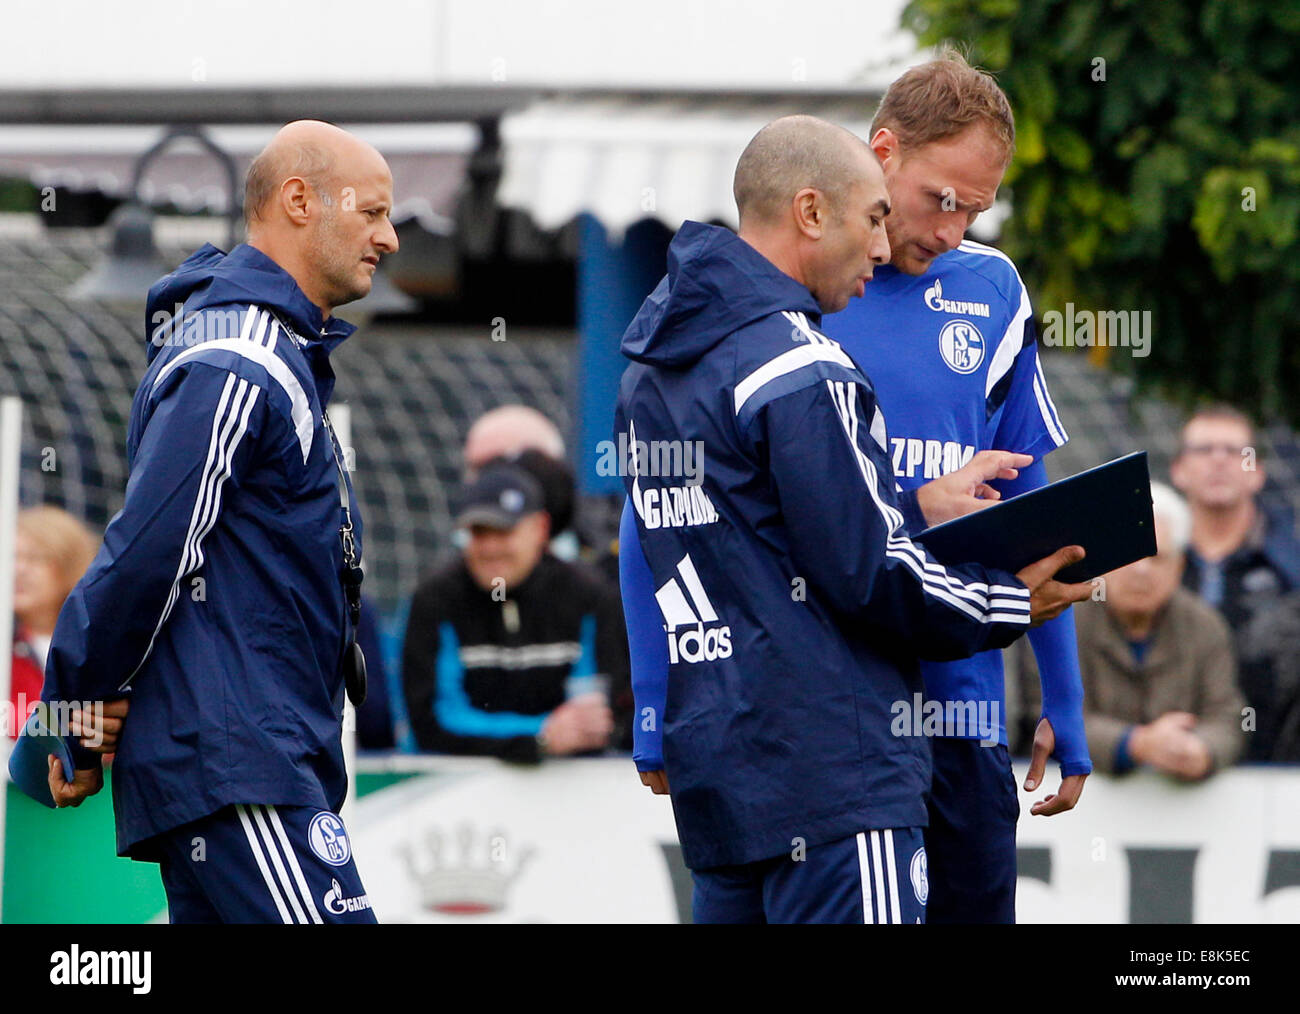 Geselnkirchen, Germany. 9th Oct, 2014. The new headcoach of German Bundesliga soccer club Schalke 04, Roberto di Matteo, talks to Benedikt Hoewedes (R) as he leads his first training session in Geselnkirchen, Germany, 09 October 2014. New assistant coach Attilio Lombardo stands next to them. Matteo takes over from Jens Keller. Photo: Roland Weihrauch/dpa/Alamy Live News Stock Photo